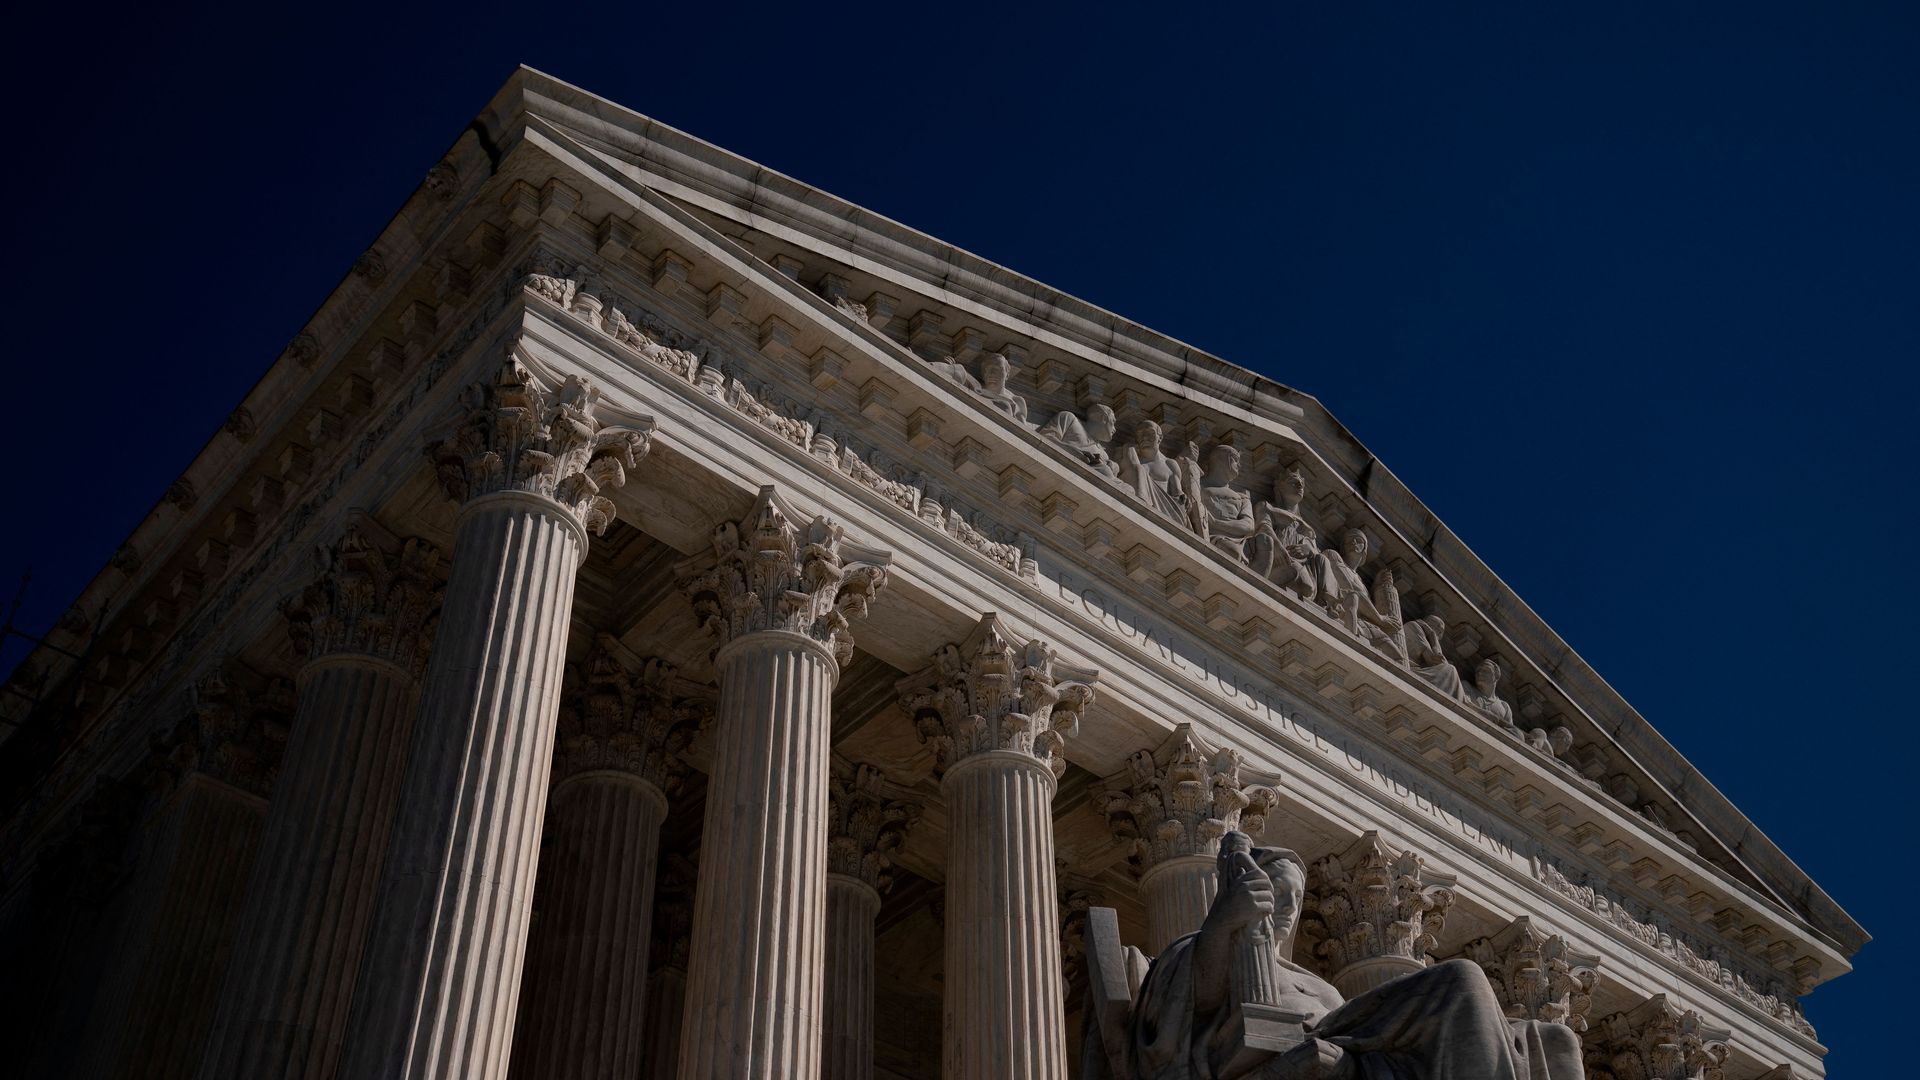 Picture of the Supreme Court building taken from a low angle